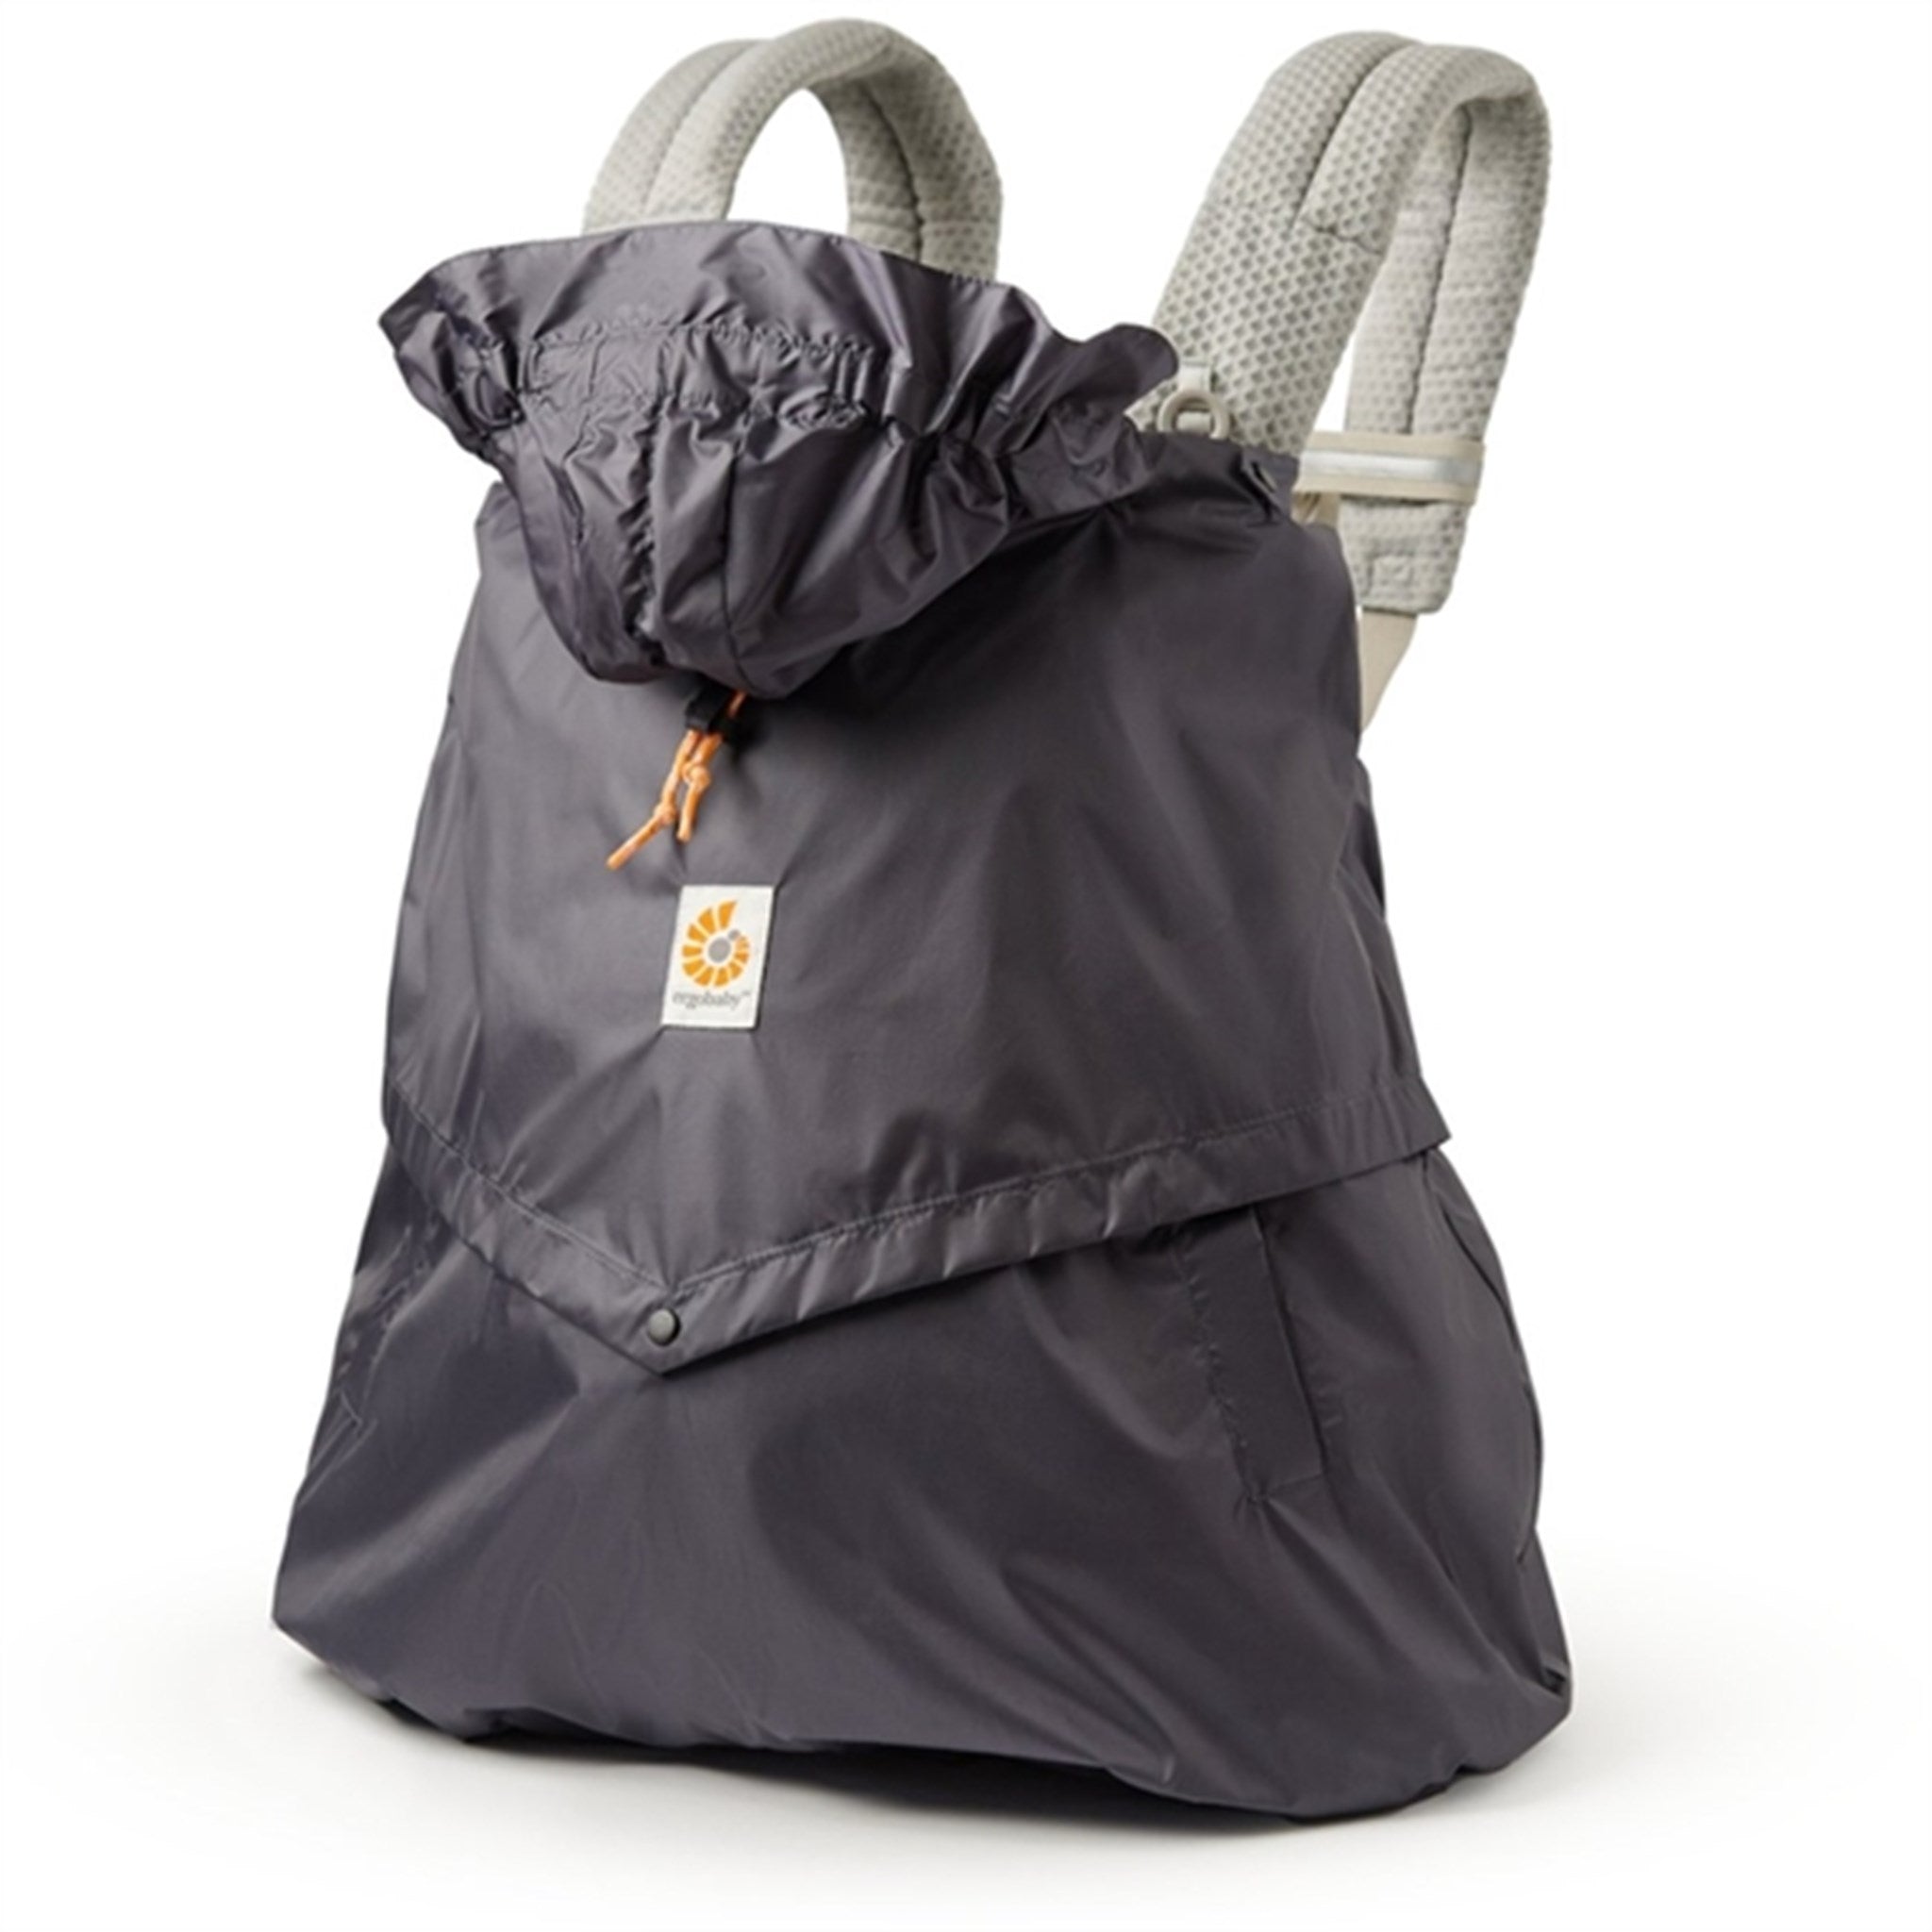 Ergobaby Rain And Wind Cover For Baby Carrier Charcoal / Black